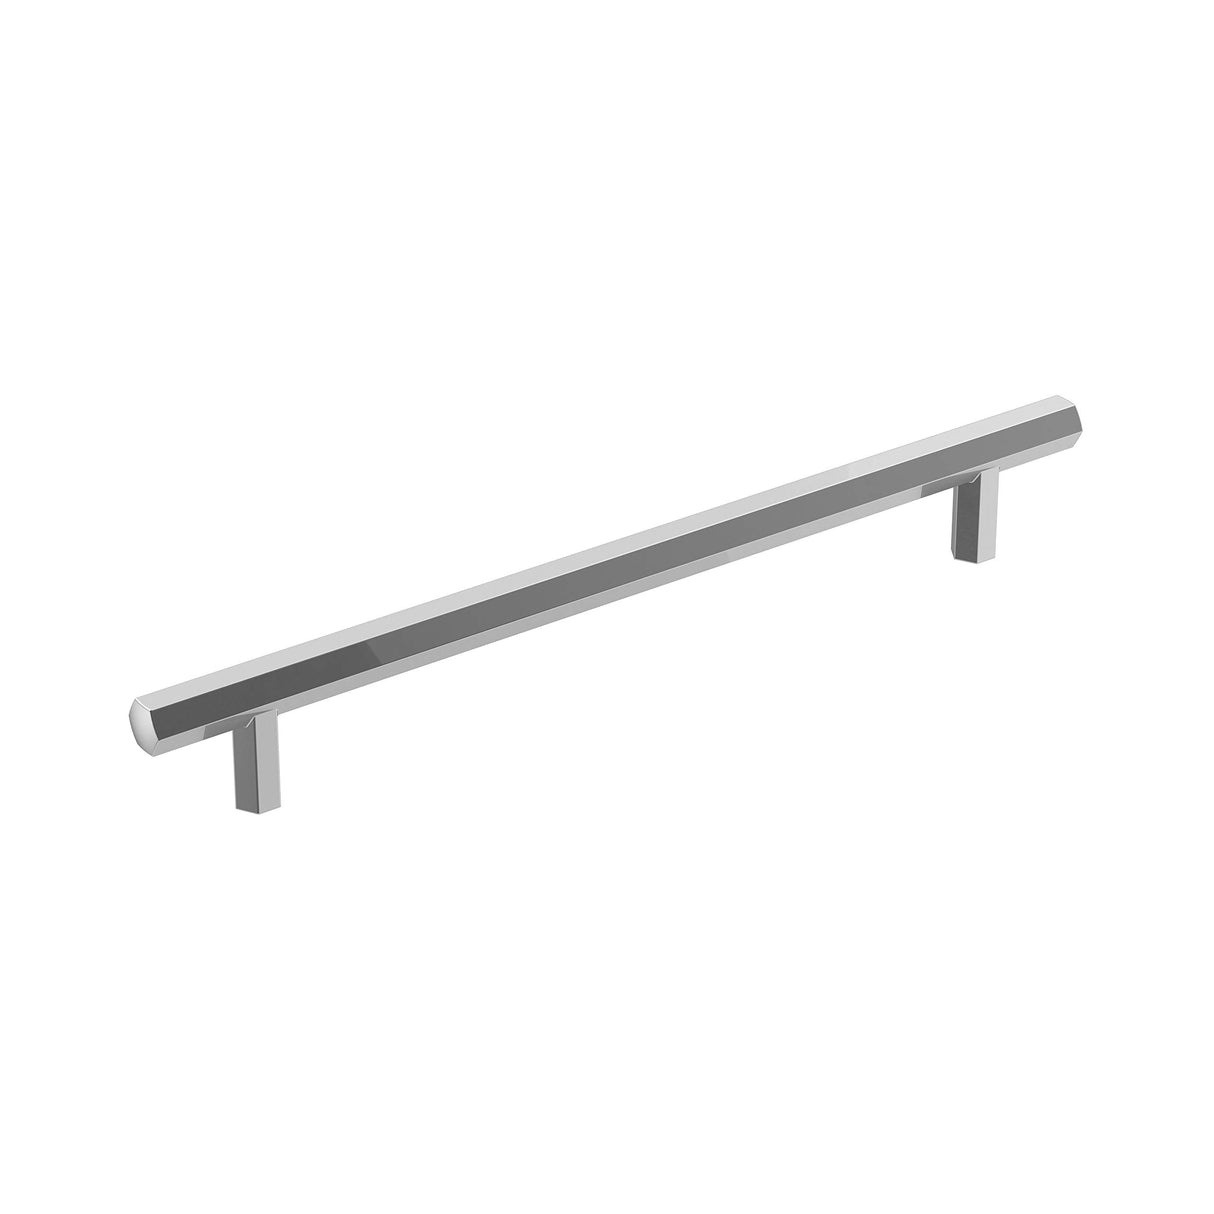 Amerock Cabinet Pull Polished Chrome 7-9/16 inch (192 mm) Center-to-Center Caliber 1 Pack Drawer Pull Cabinet Handle Cabinet Hardware